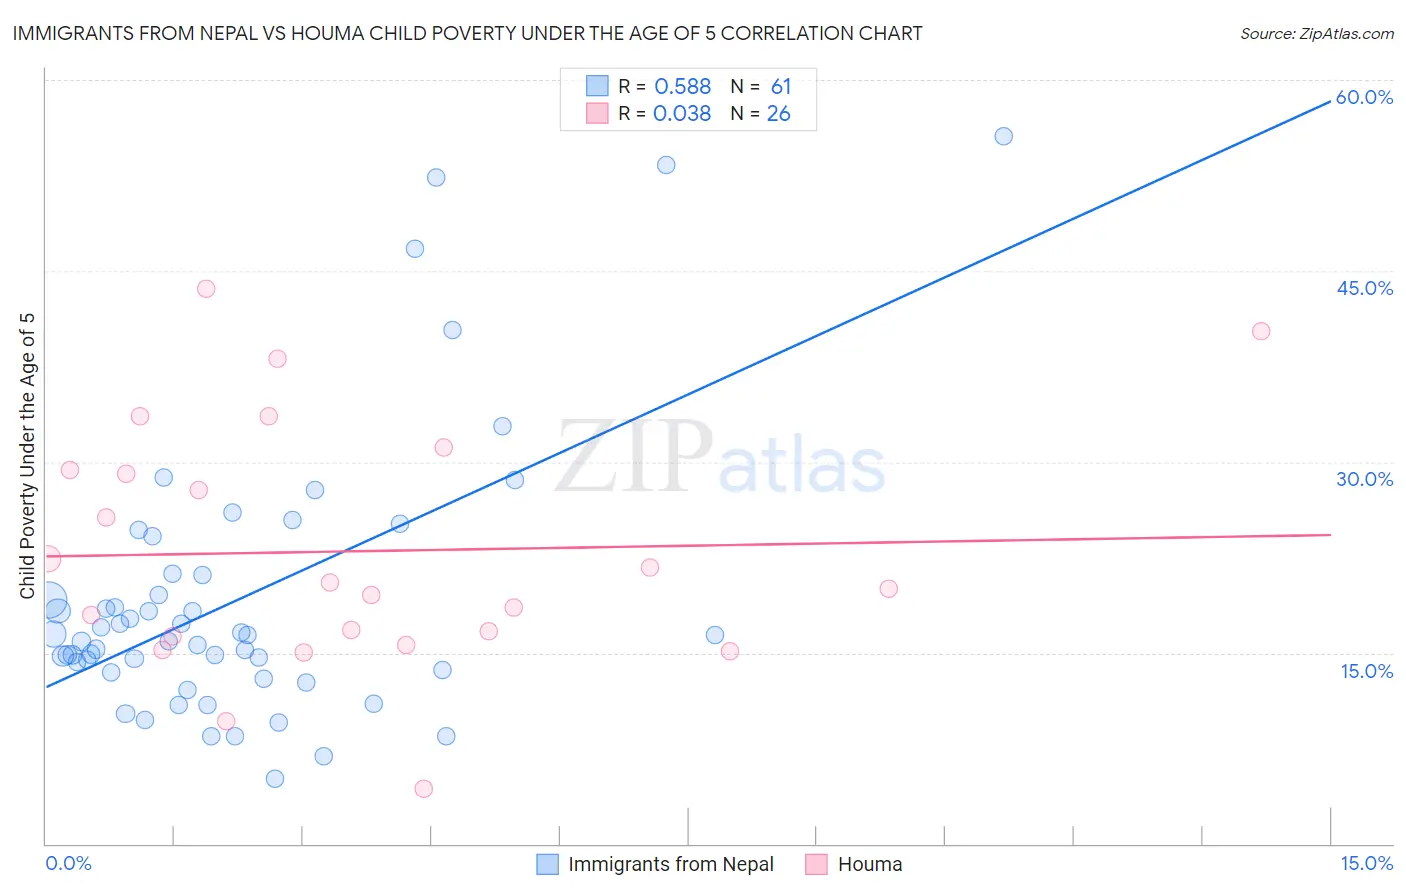 Immigrants from Nepal vs Houma Child Poverty Under the Age of 5